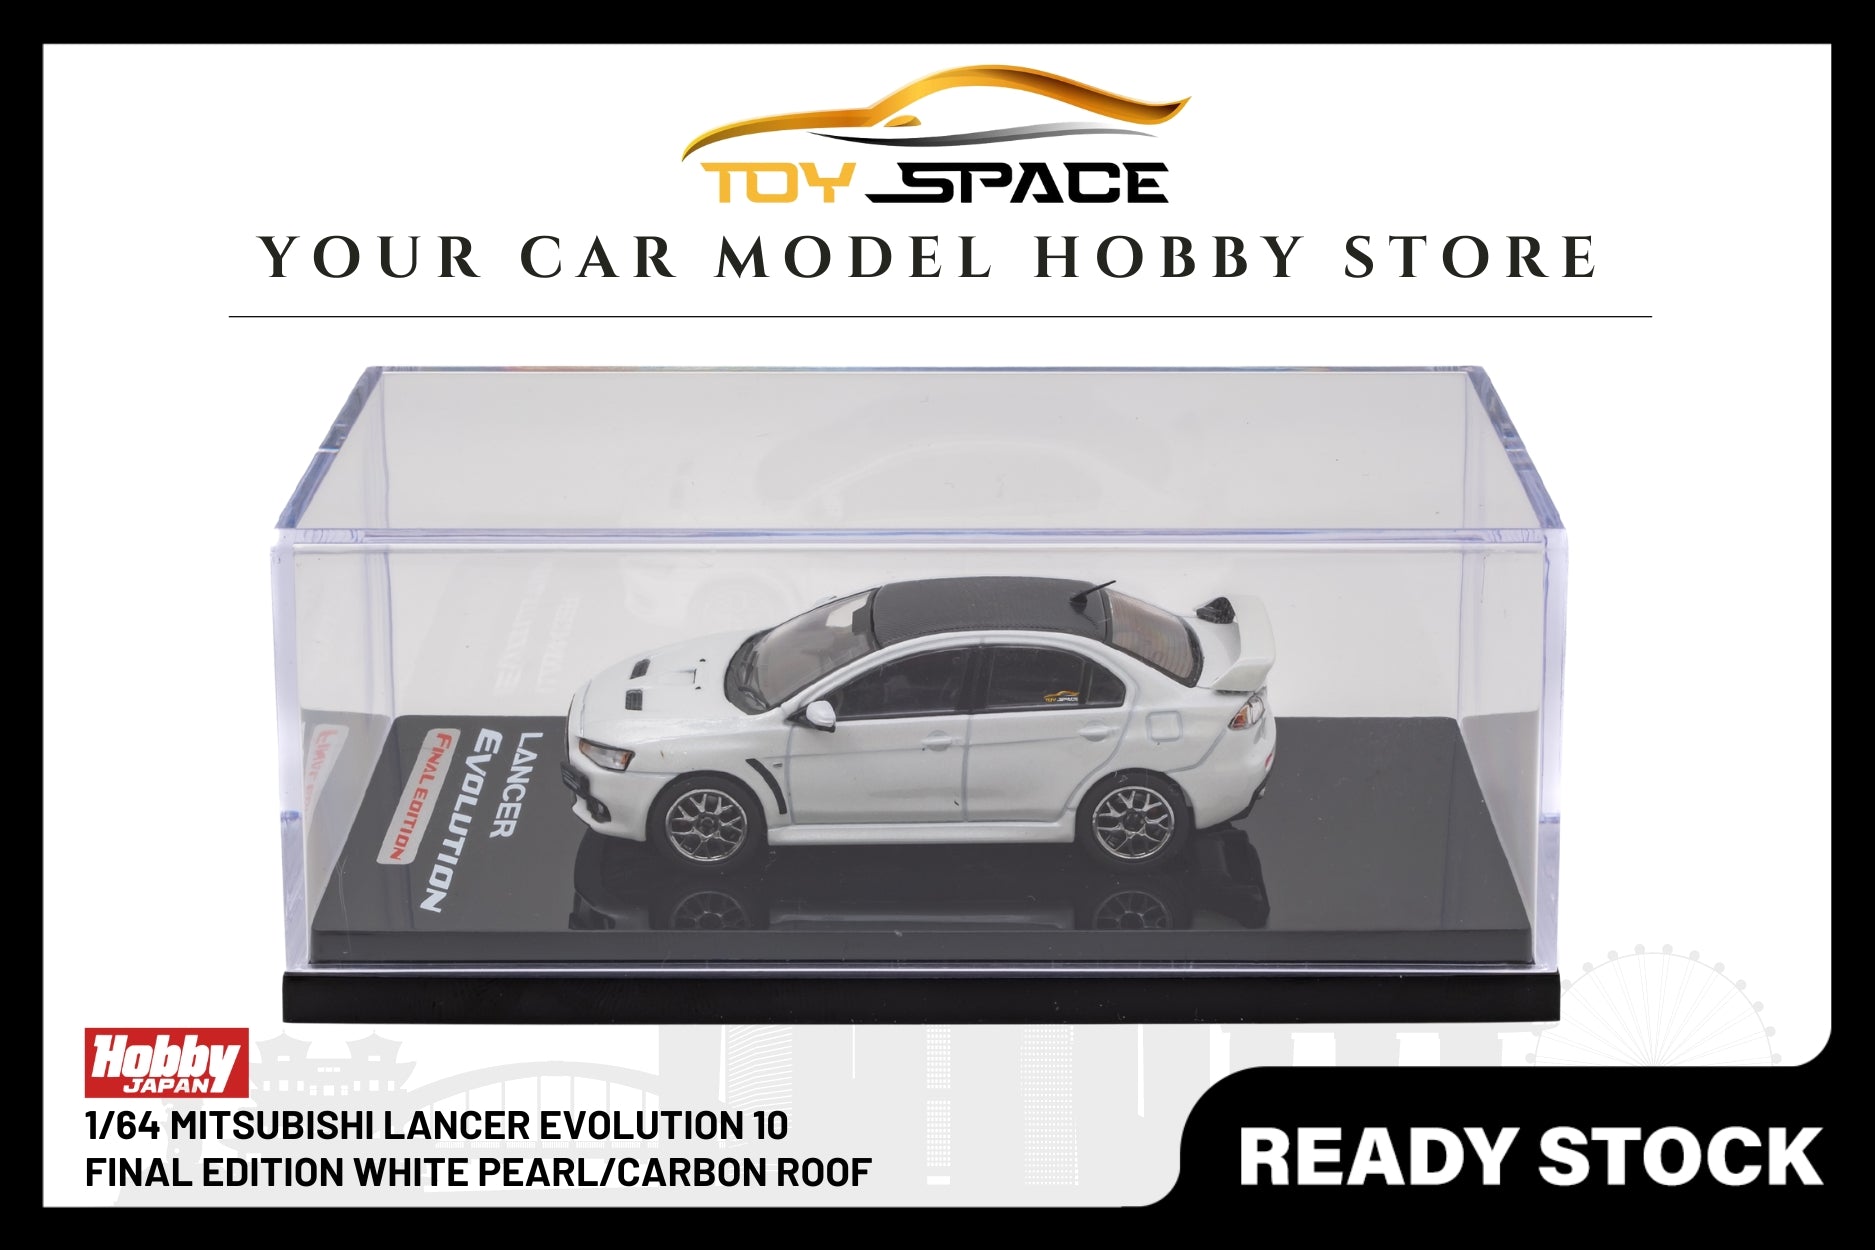 [HOBBY JAPAN] 1/64 Mitsubishi Lancer Evolution 10 Final Edition White Pearl/Carbon Roof